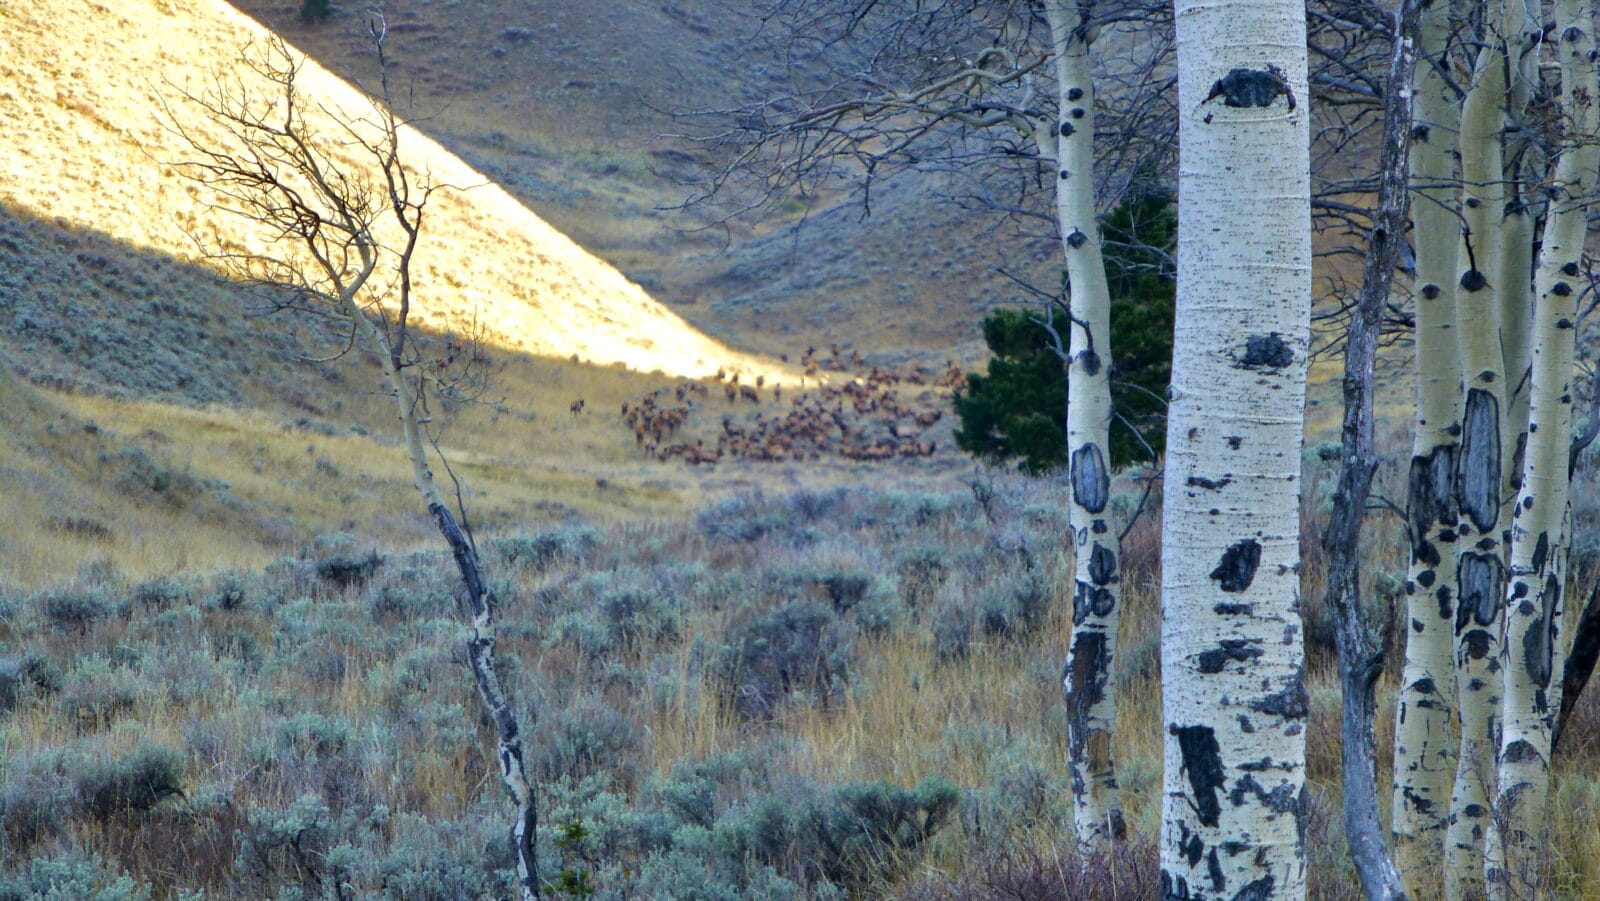 A herd of elk in a valley with birch trees in the foreground. 